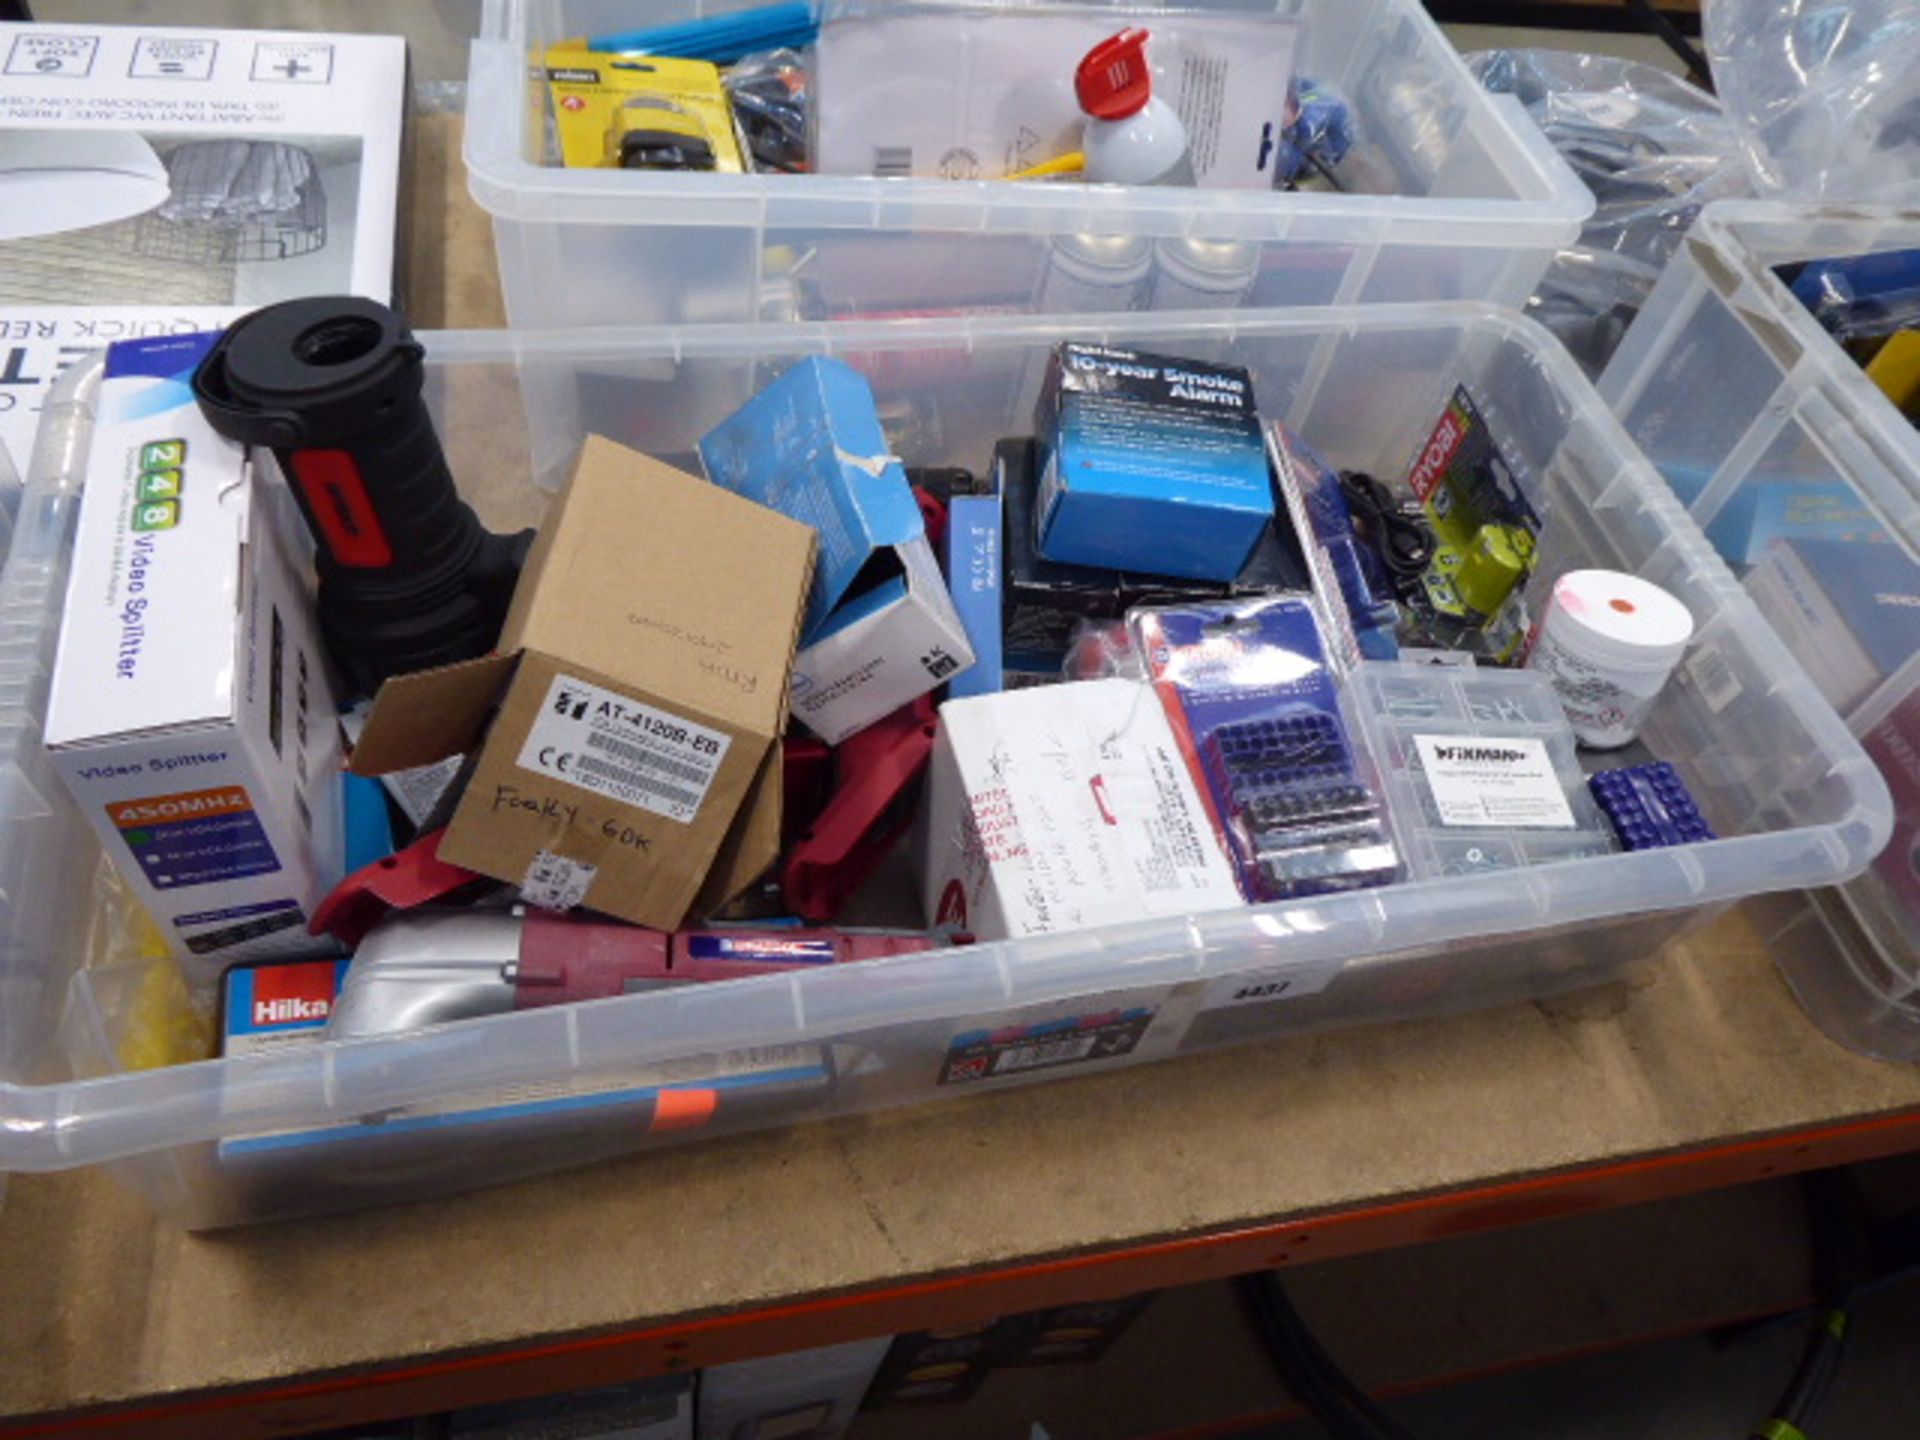 Large plastic box containing security bit sets, torches, smoke alarms, batteries, etc